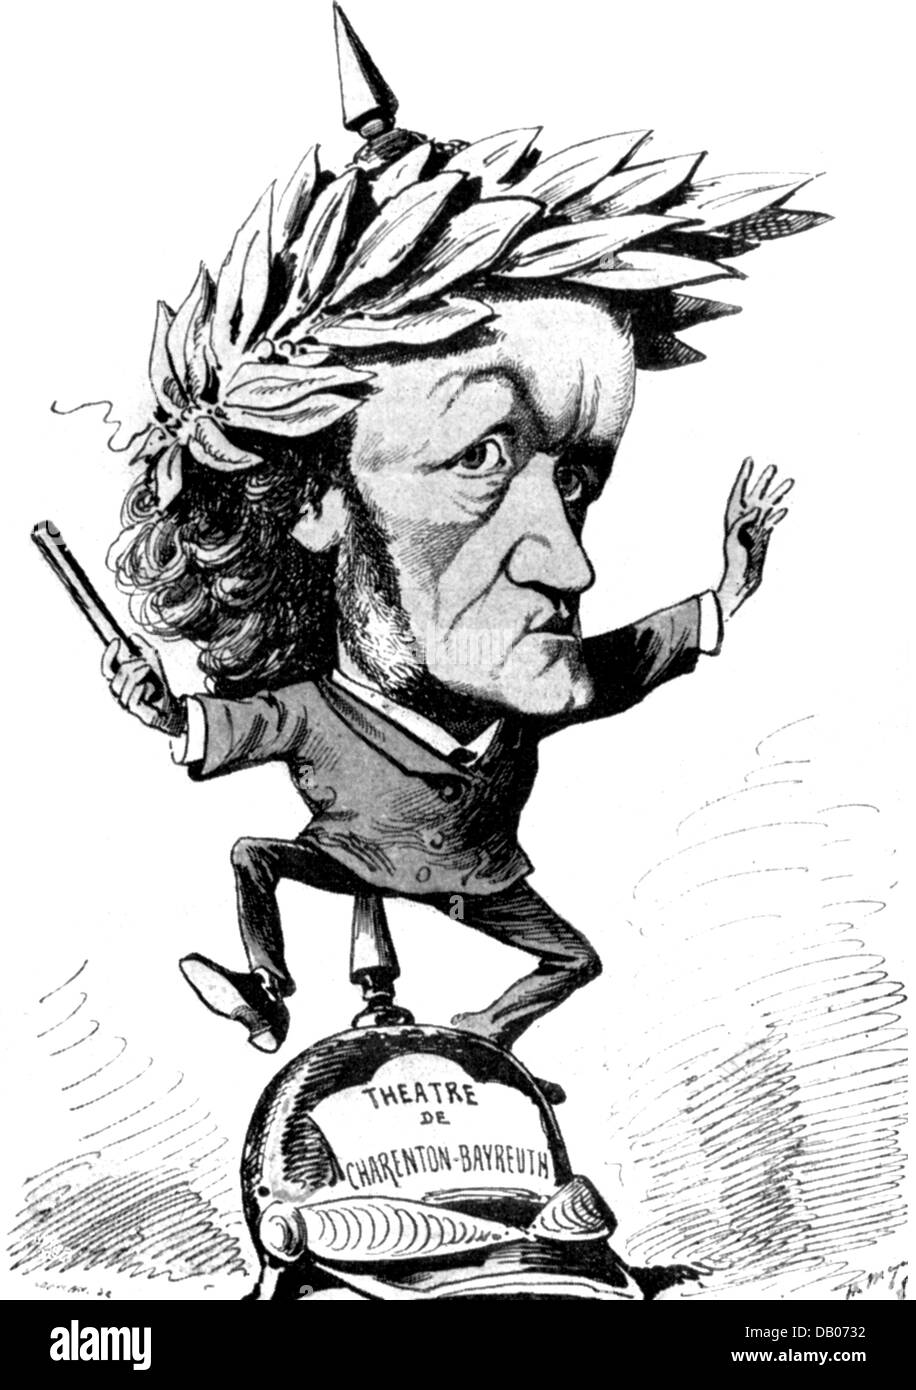 Wagner, Richard, 22.5.1813 - 13.2.1883, German composer, conducting with laurel wreath on spiked helmet, caricature, by Henry Meyer, from 'Le Sifflet', wood engraving, Paris, 1876, from Karl Eugen Schmidt, Richard Wagner in French caricature, Stock Photo